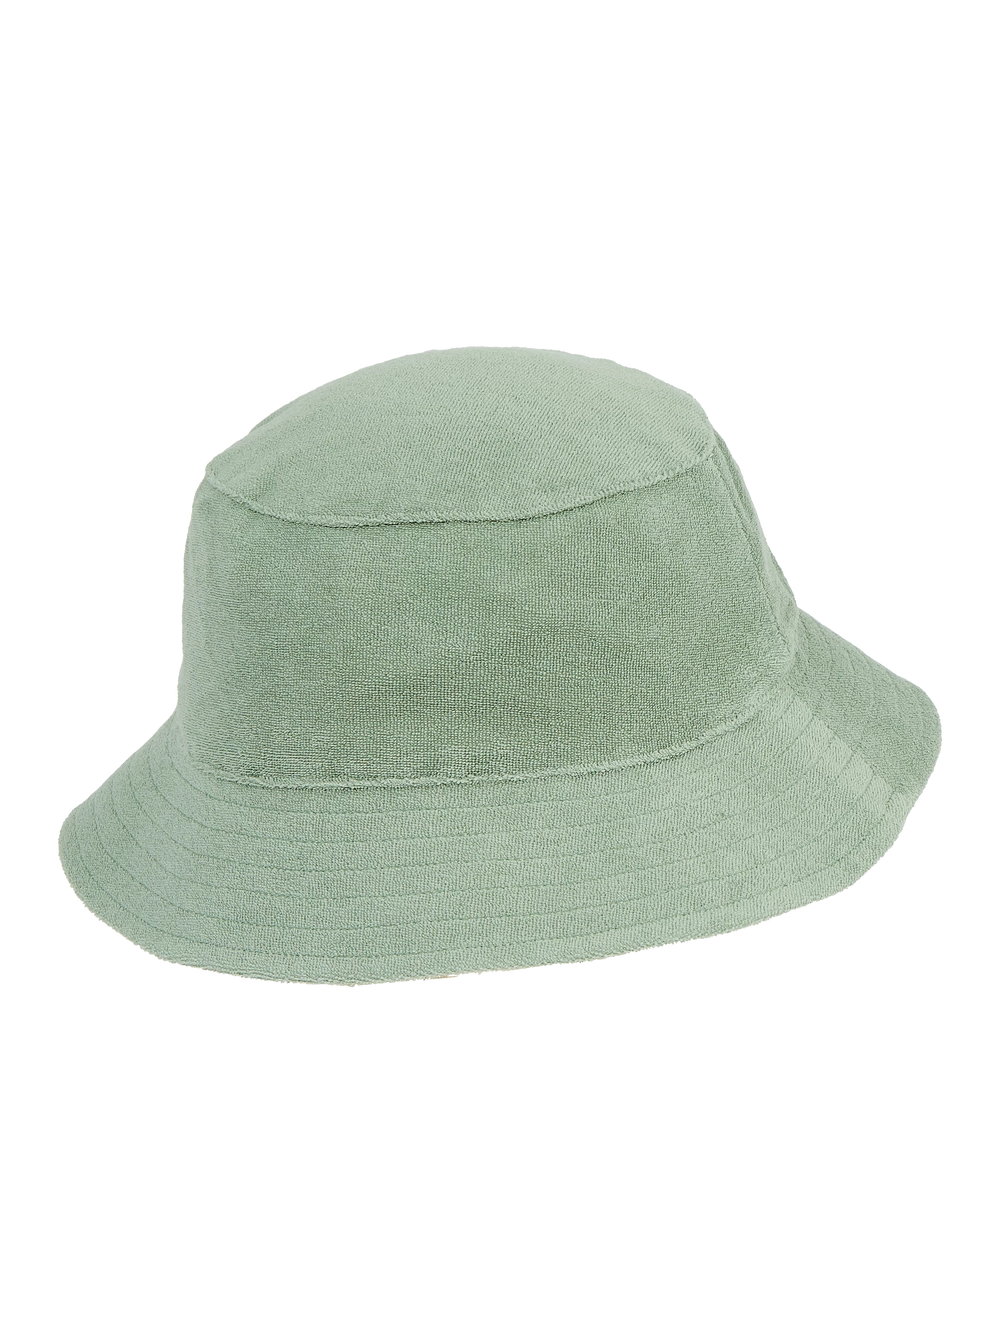 Protest PRTORIOLE Terry Towelling Bucket Hat - Green Bay